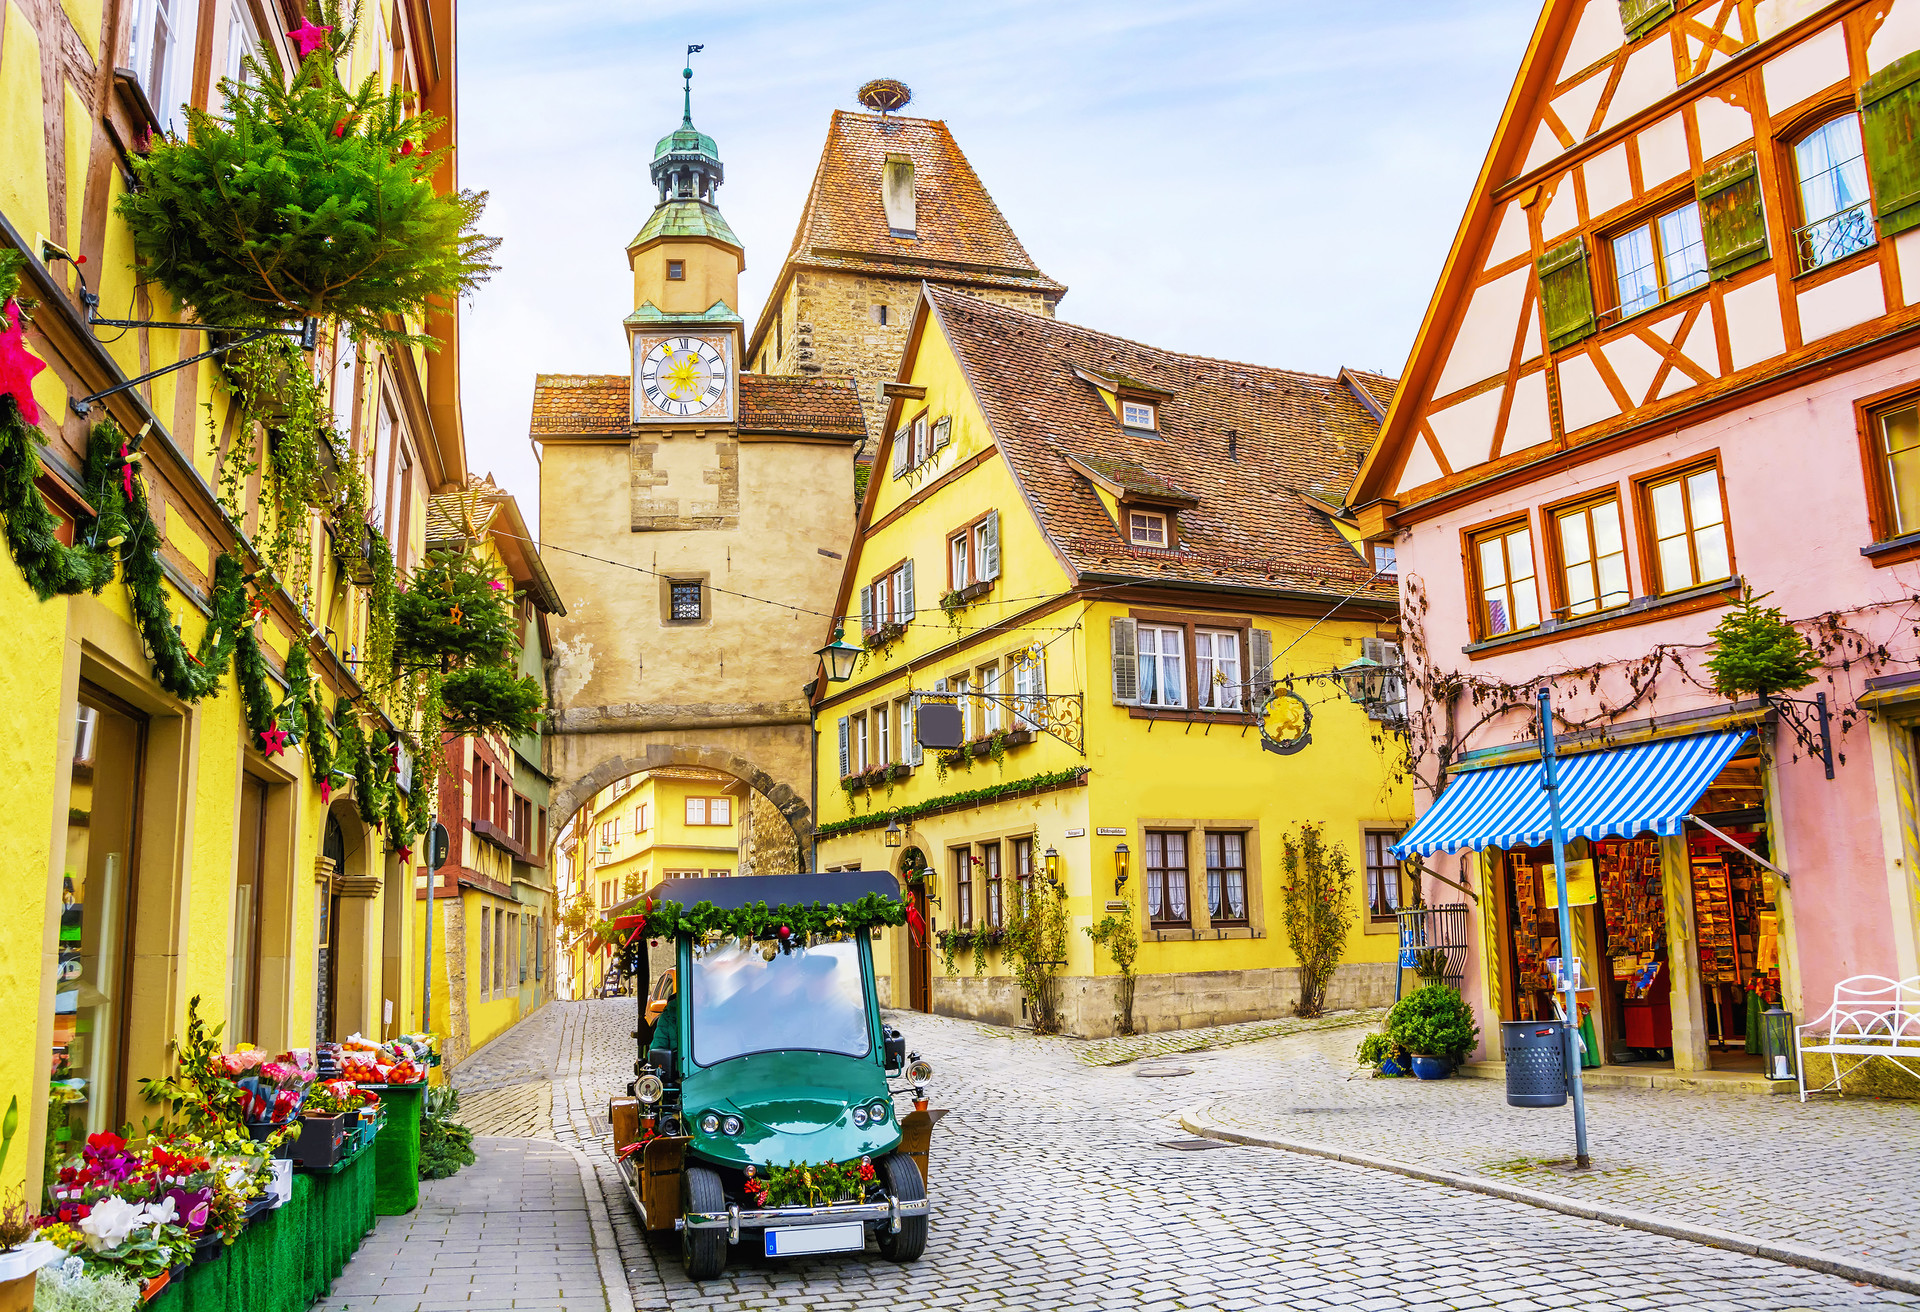 Touristic retro car on picturesque street, decorated for Christmas holiday in Rothenburg ob der Tauber, picturesque medieval historic town in Bavaria, Germany; Shutterstock ID 709473610; Purpose: ; Brand (KAYAK, Momondo, Any):